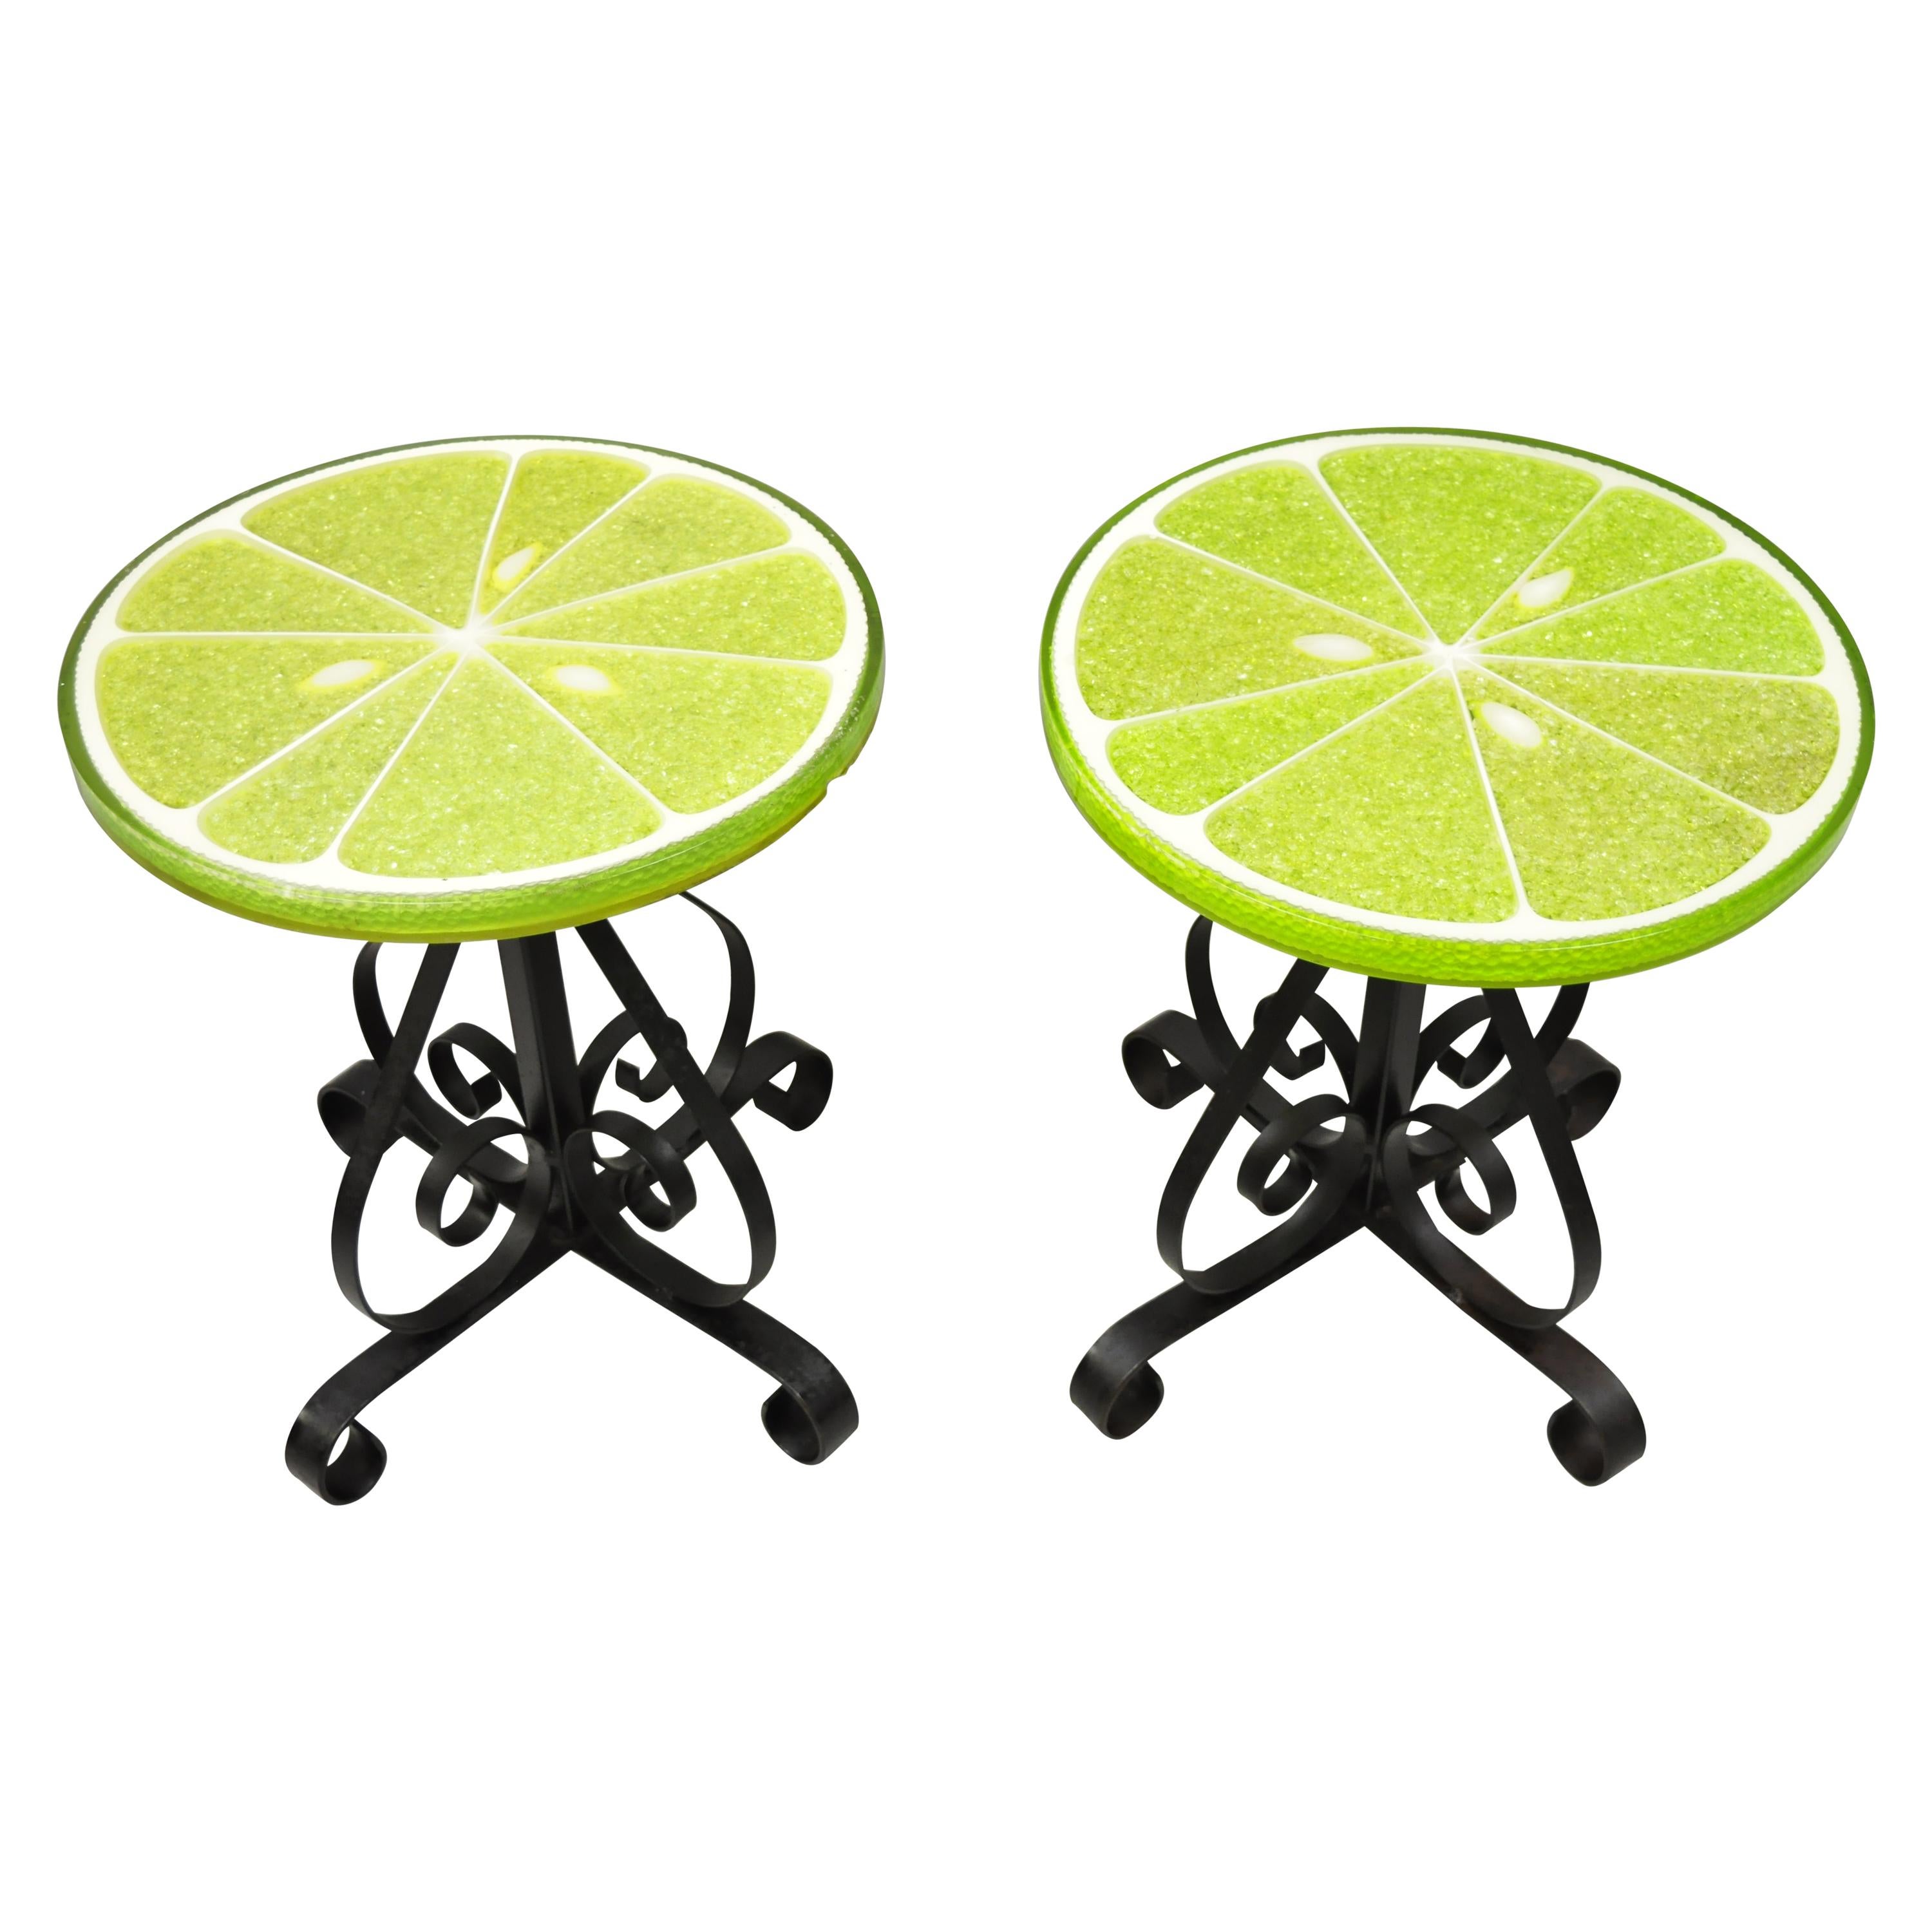 Vintage Gamma Associates Midcentury Green Lime Slice Resin Side Table, a Pair